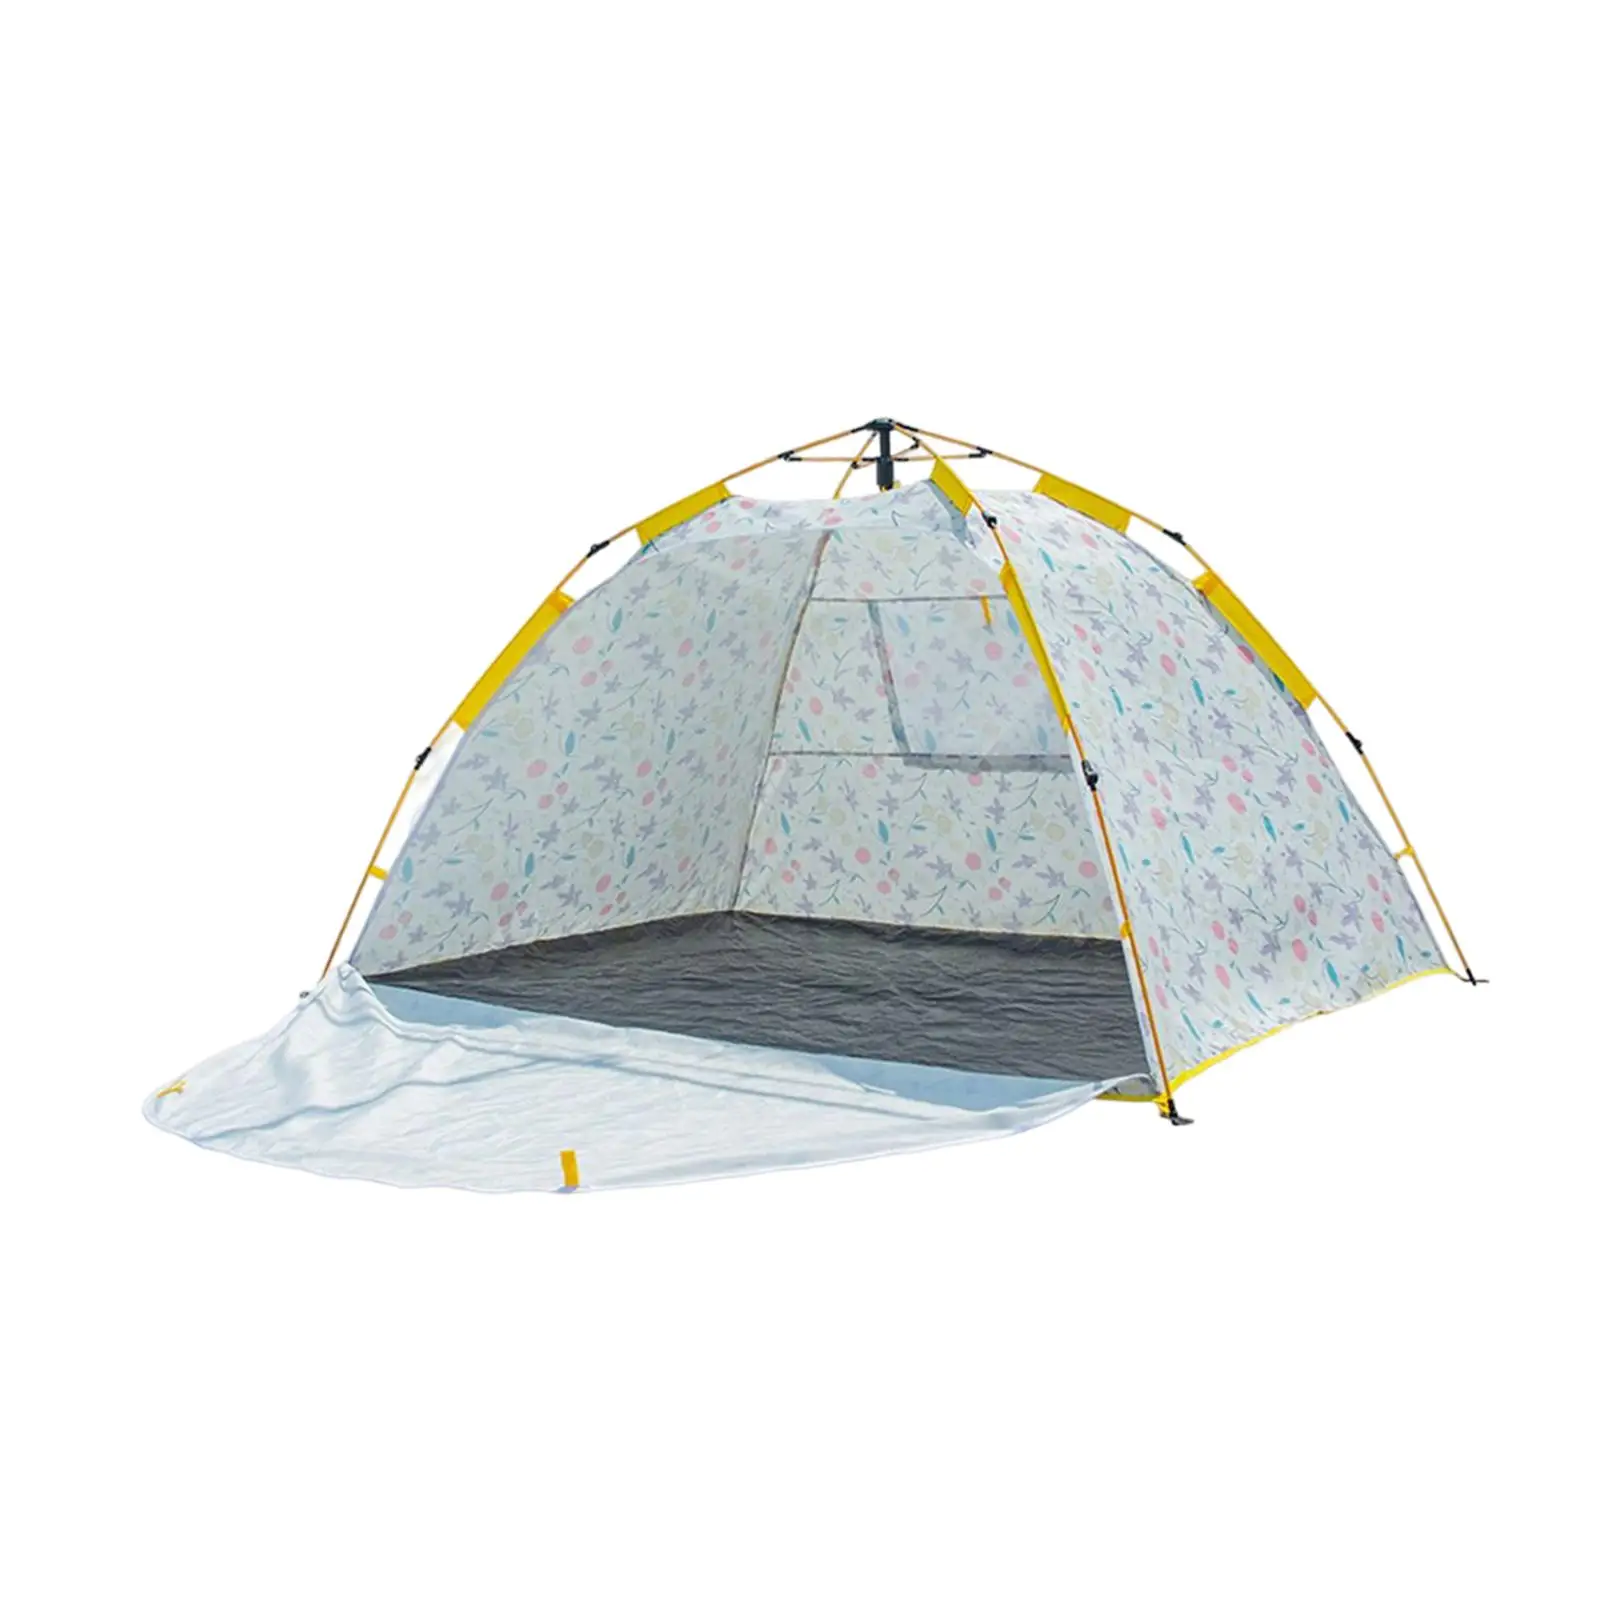 Ultralight Camping Tent Automatic Quick Opening Sun Protection Sun Shelter for Sports Festival Gathering Picnic Outdoor Climbing